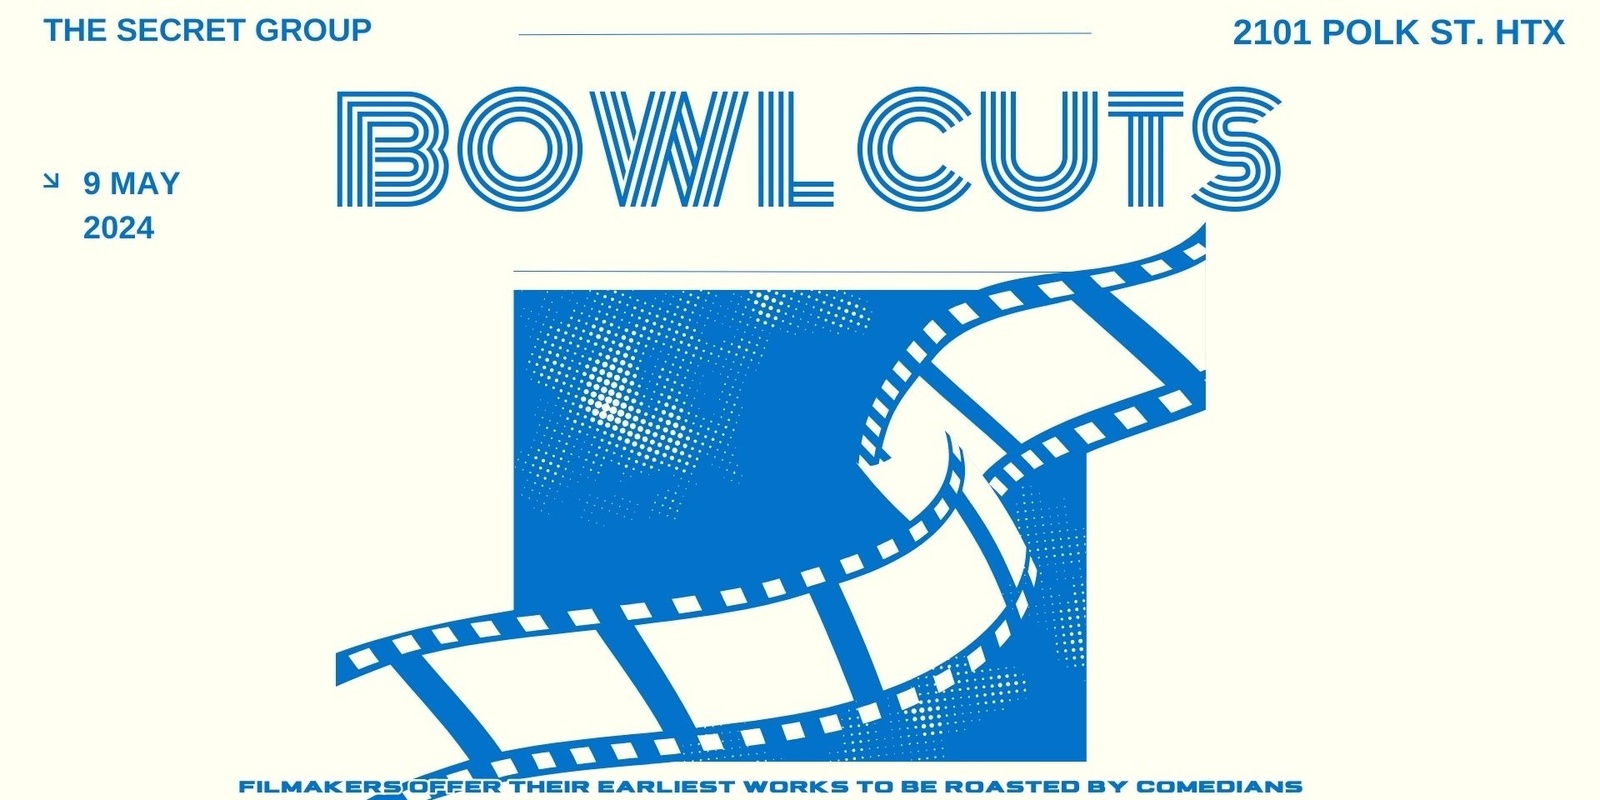 Banner image for BOWL CUTS